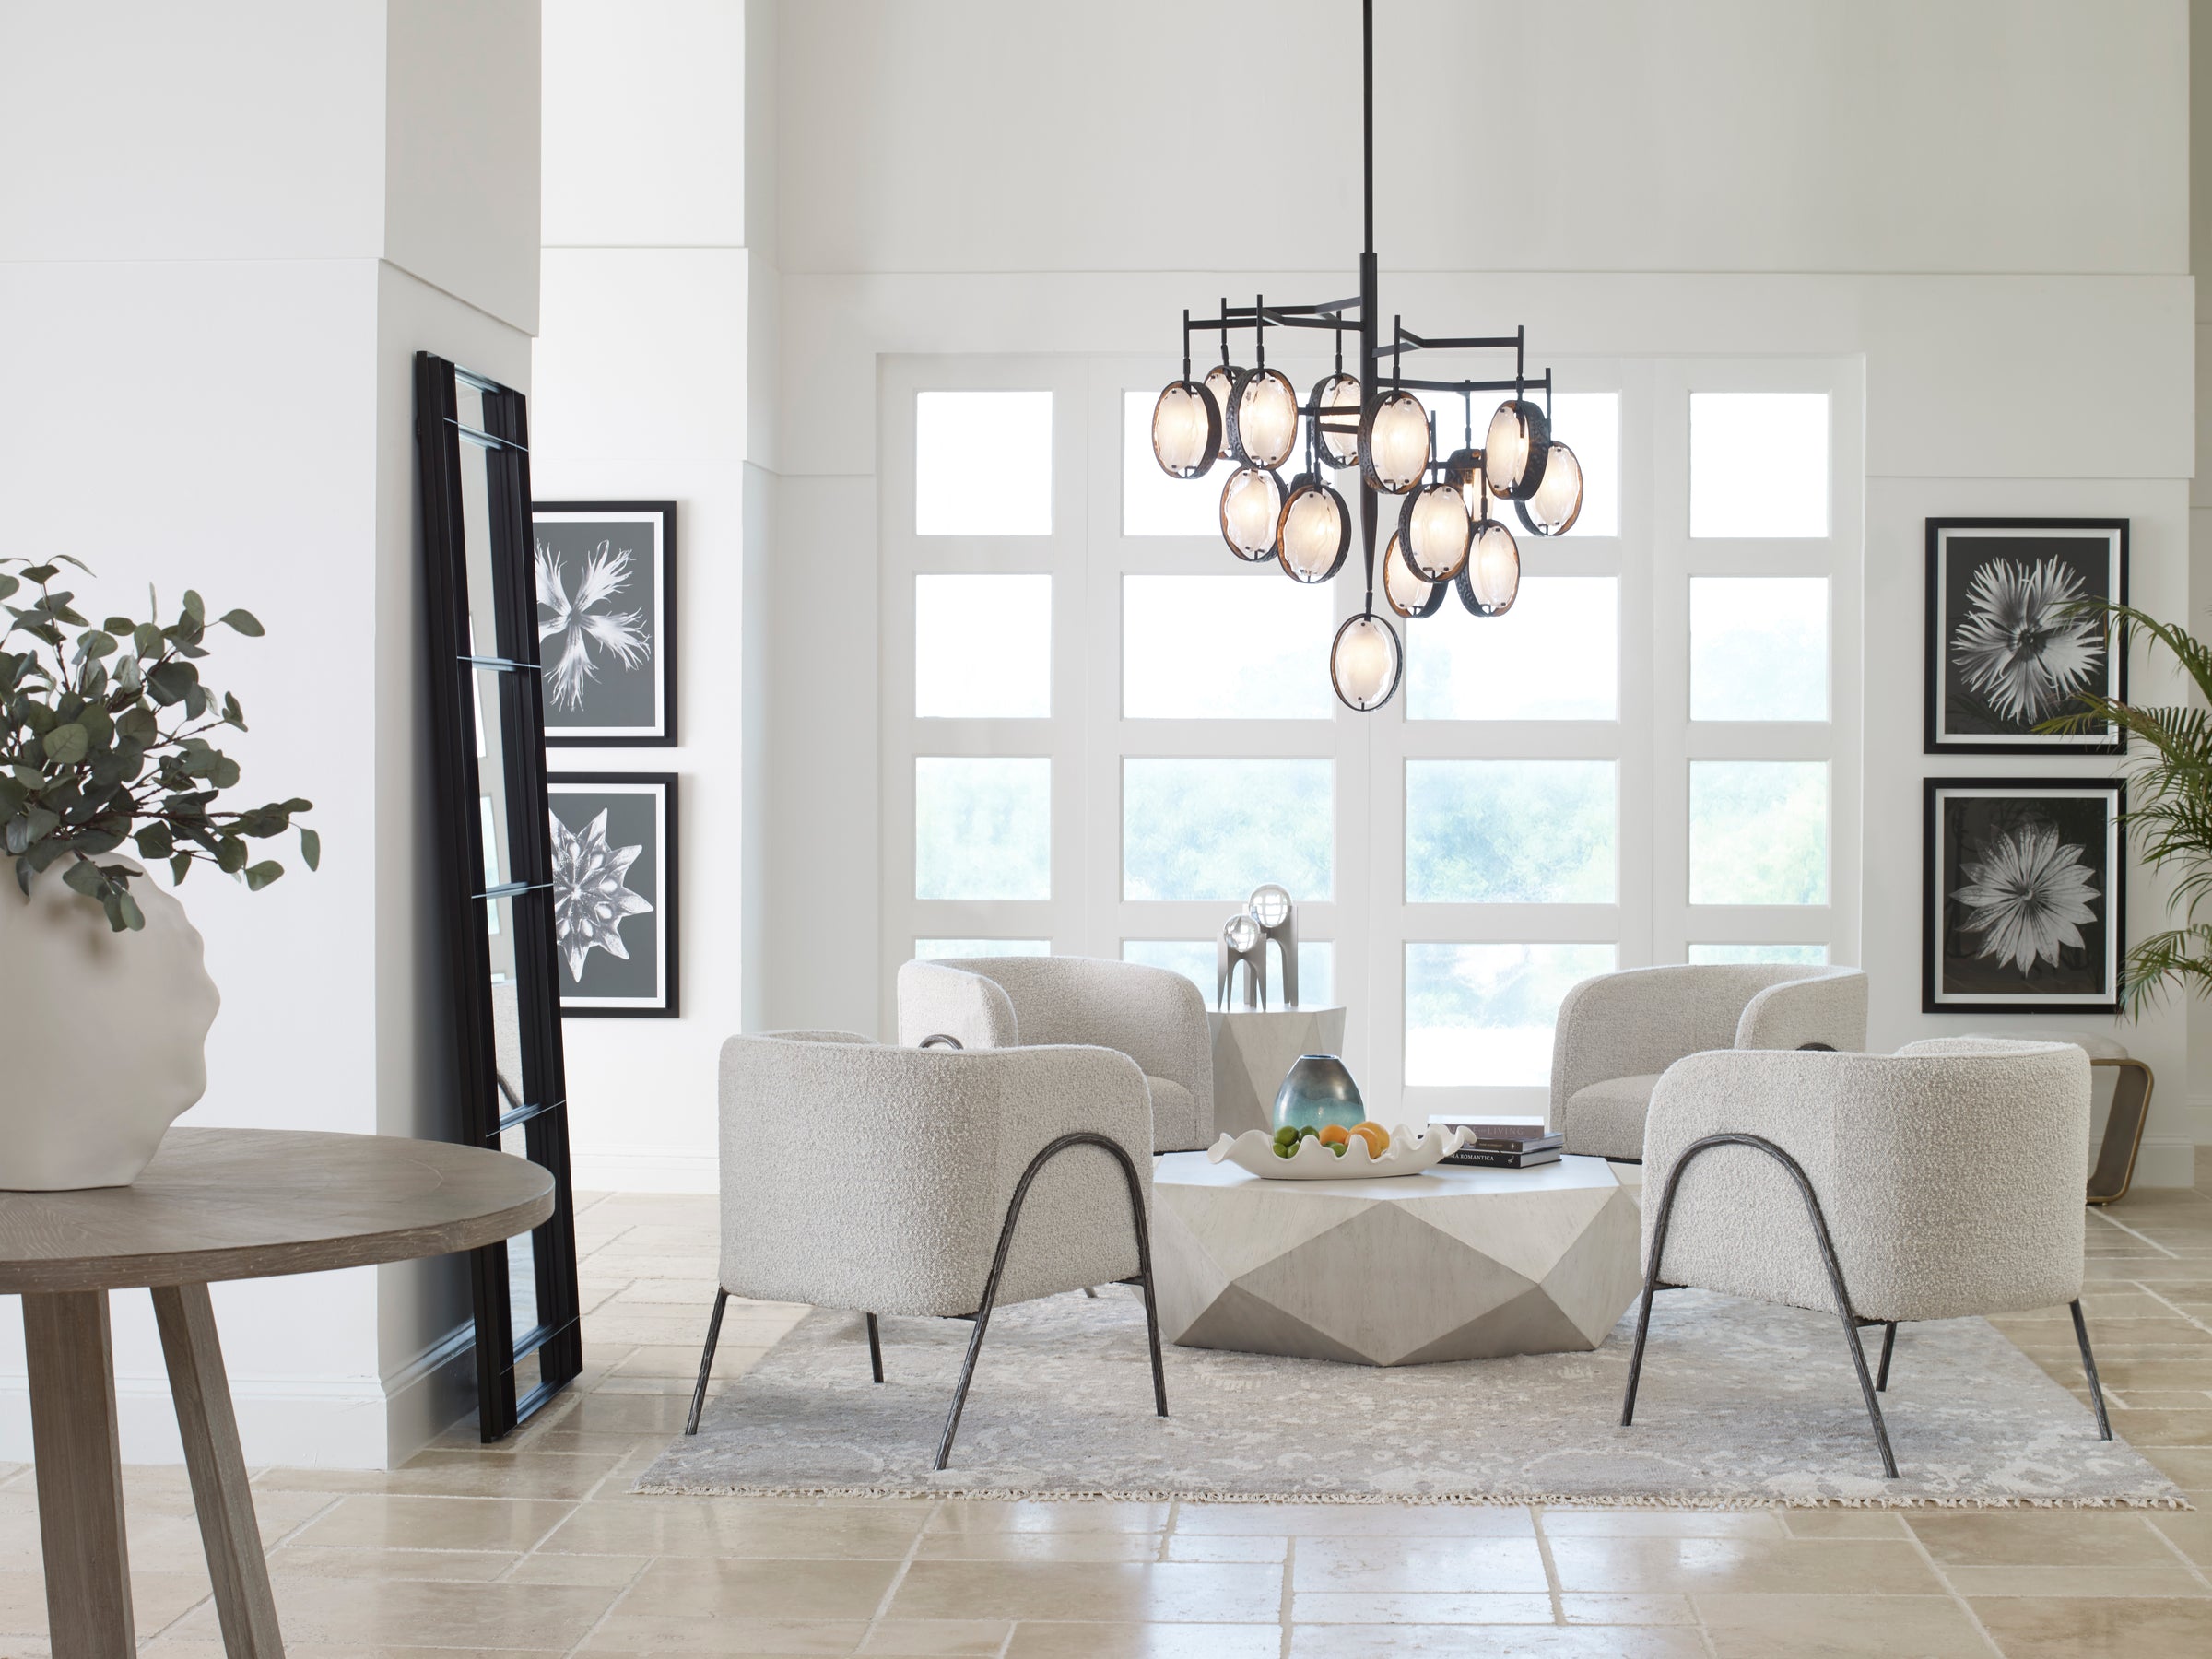 four white arm chairs sit around a geometric white coffee table underneath a metal and glass chandelier.